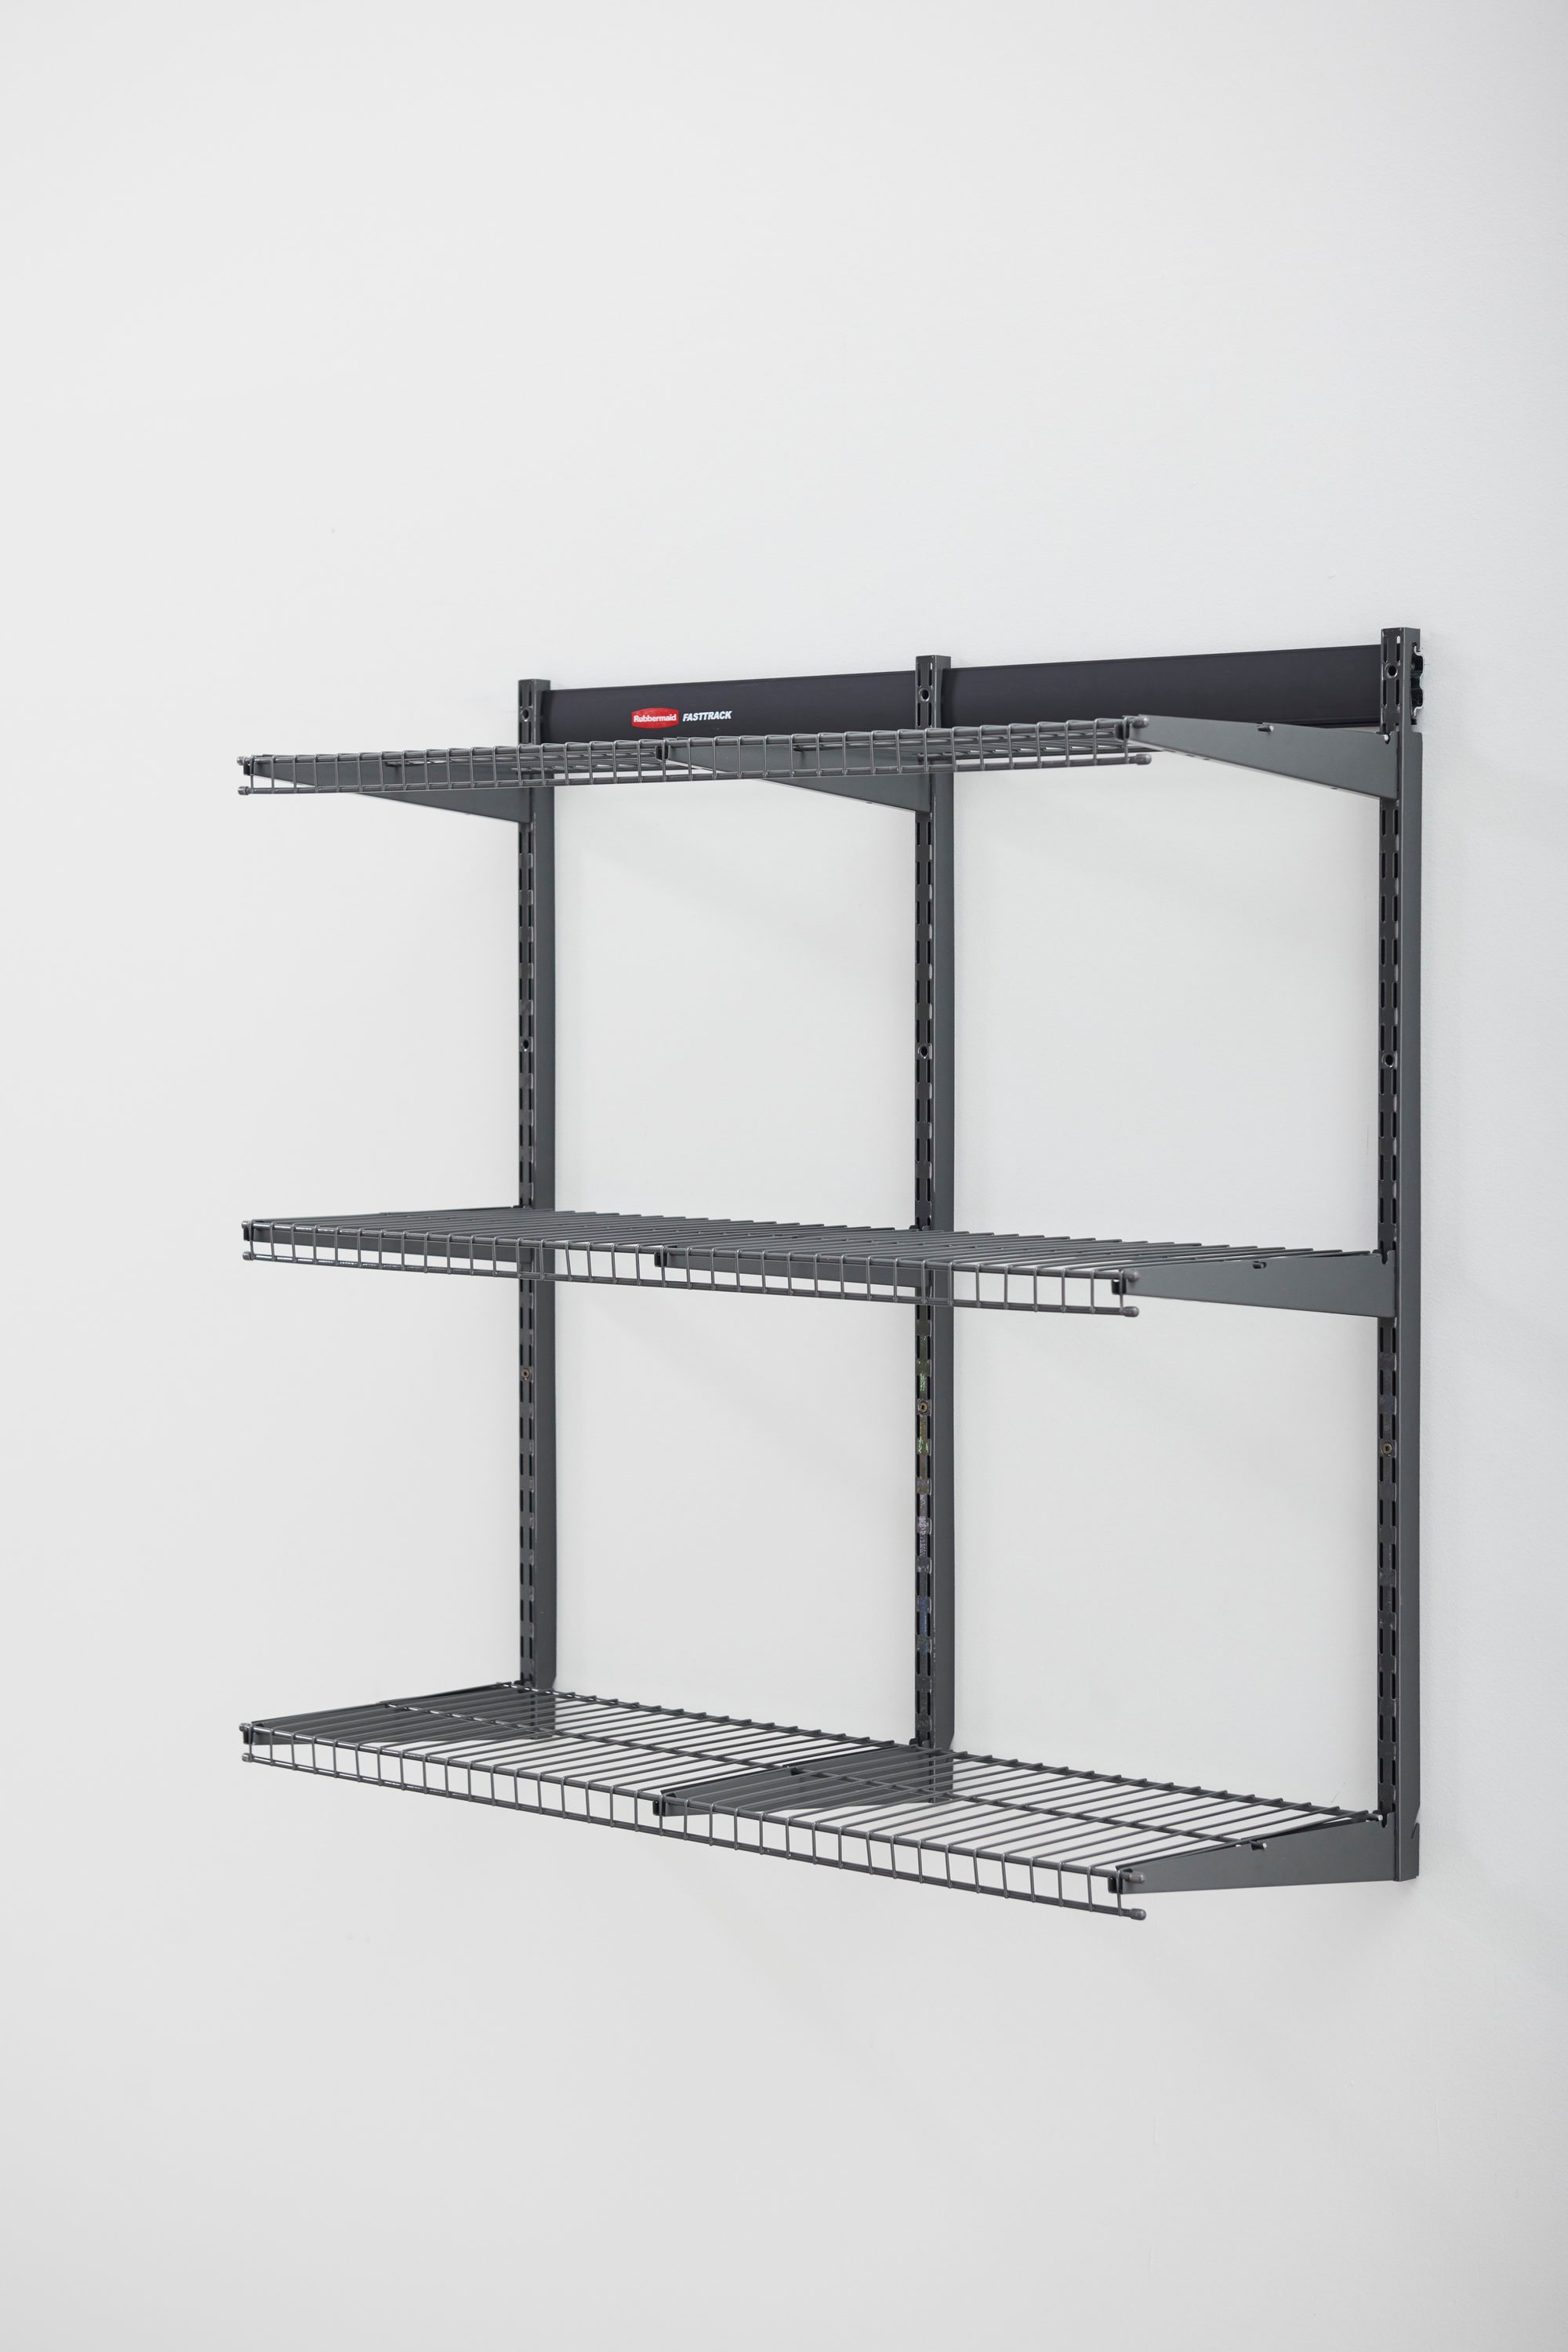 Rubbermaid Fasttrack Garage 16 Piece, Rubbermaid Adjustable Shelving Instructions